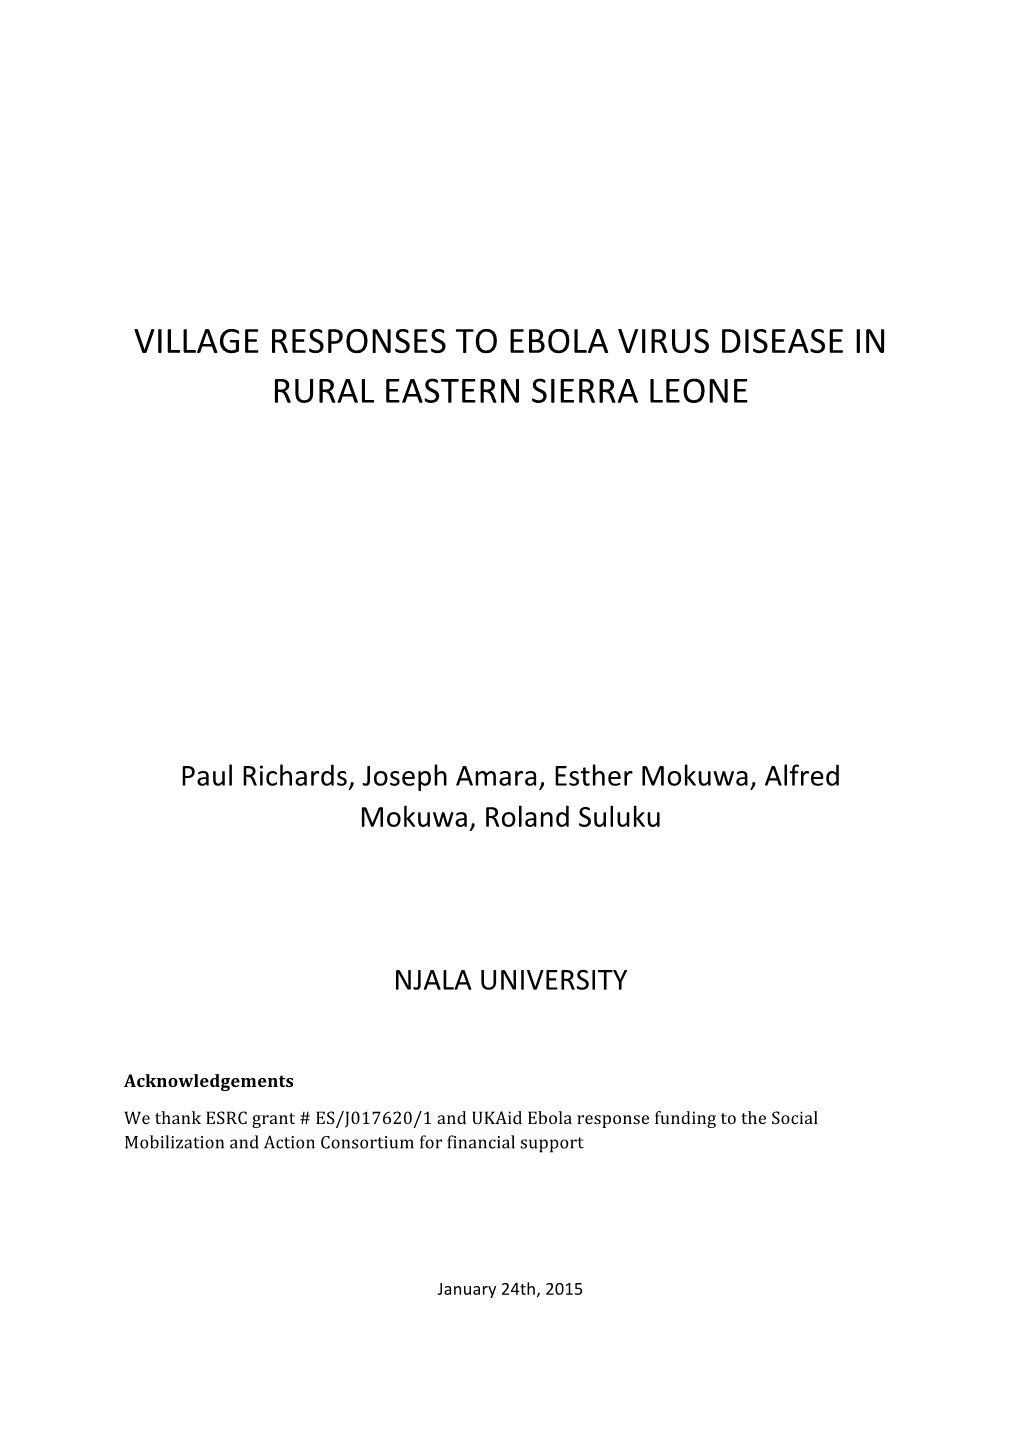 Kenema District Are Presented, Covering Local Responses to Health Issues, and Ebola in Particular